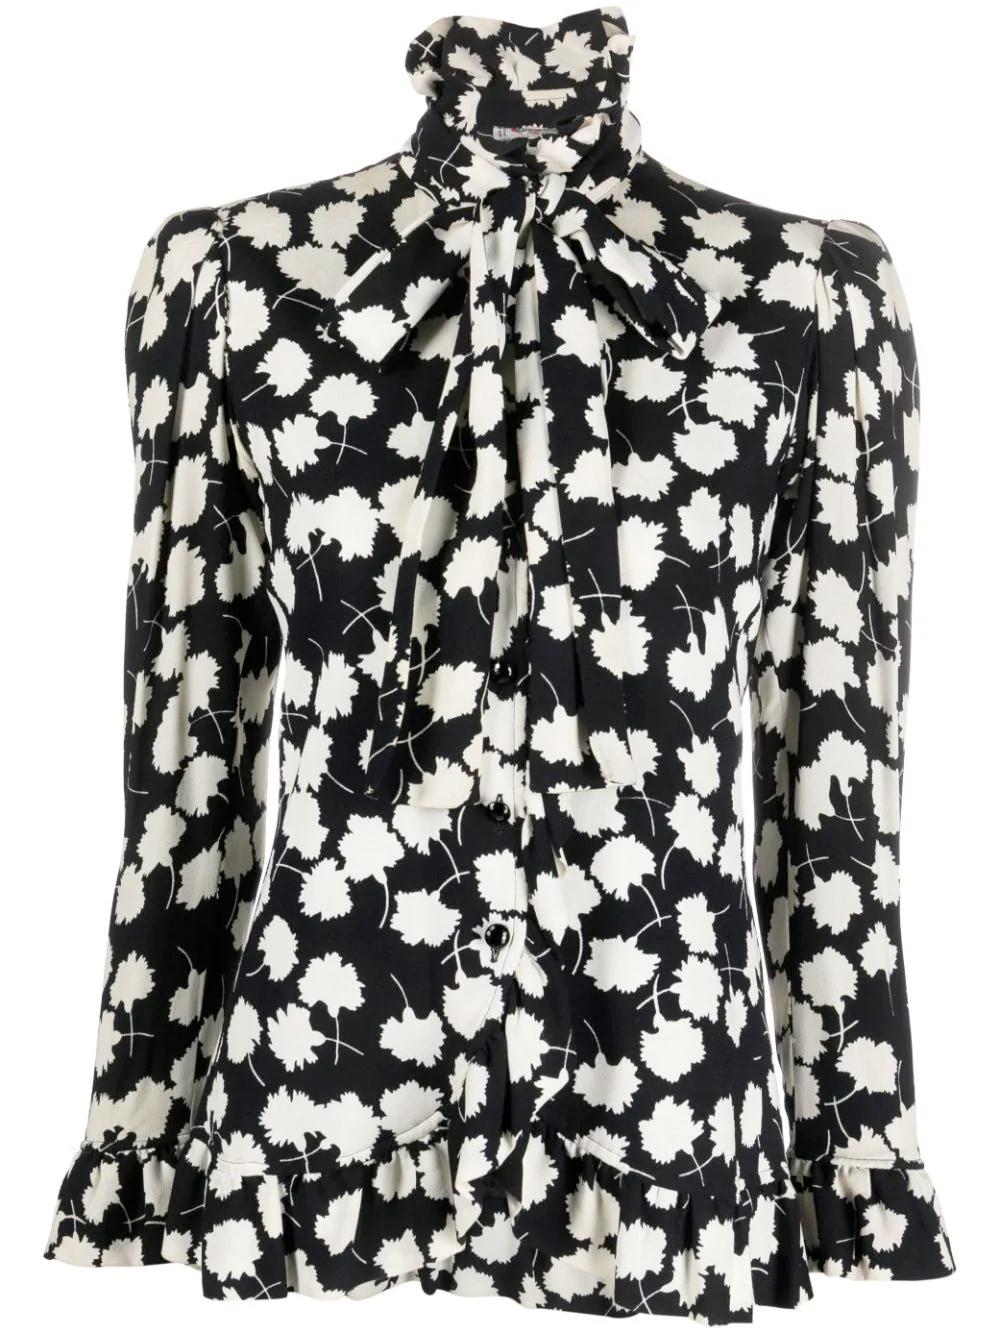 1978 Yves Saint Laurent YSL Iconic Flower Printed Jacket For Sale 3